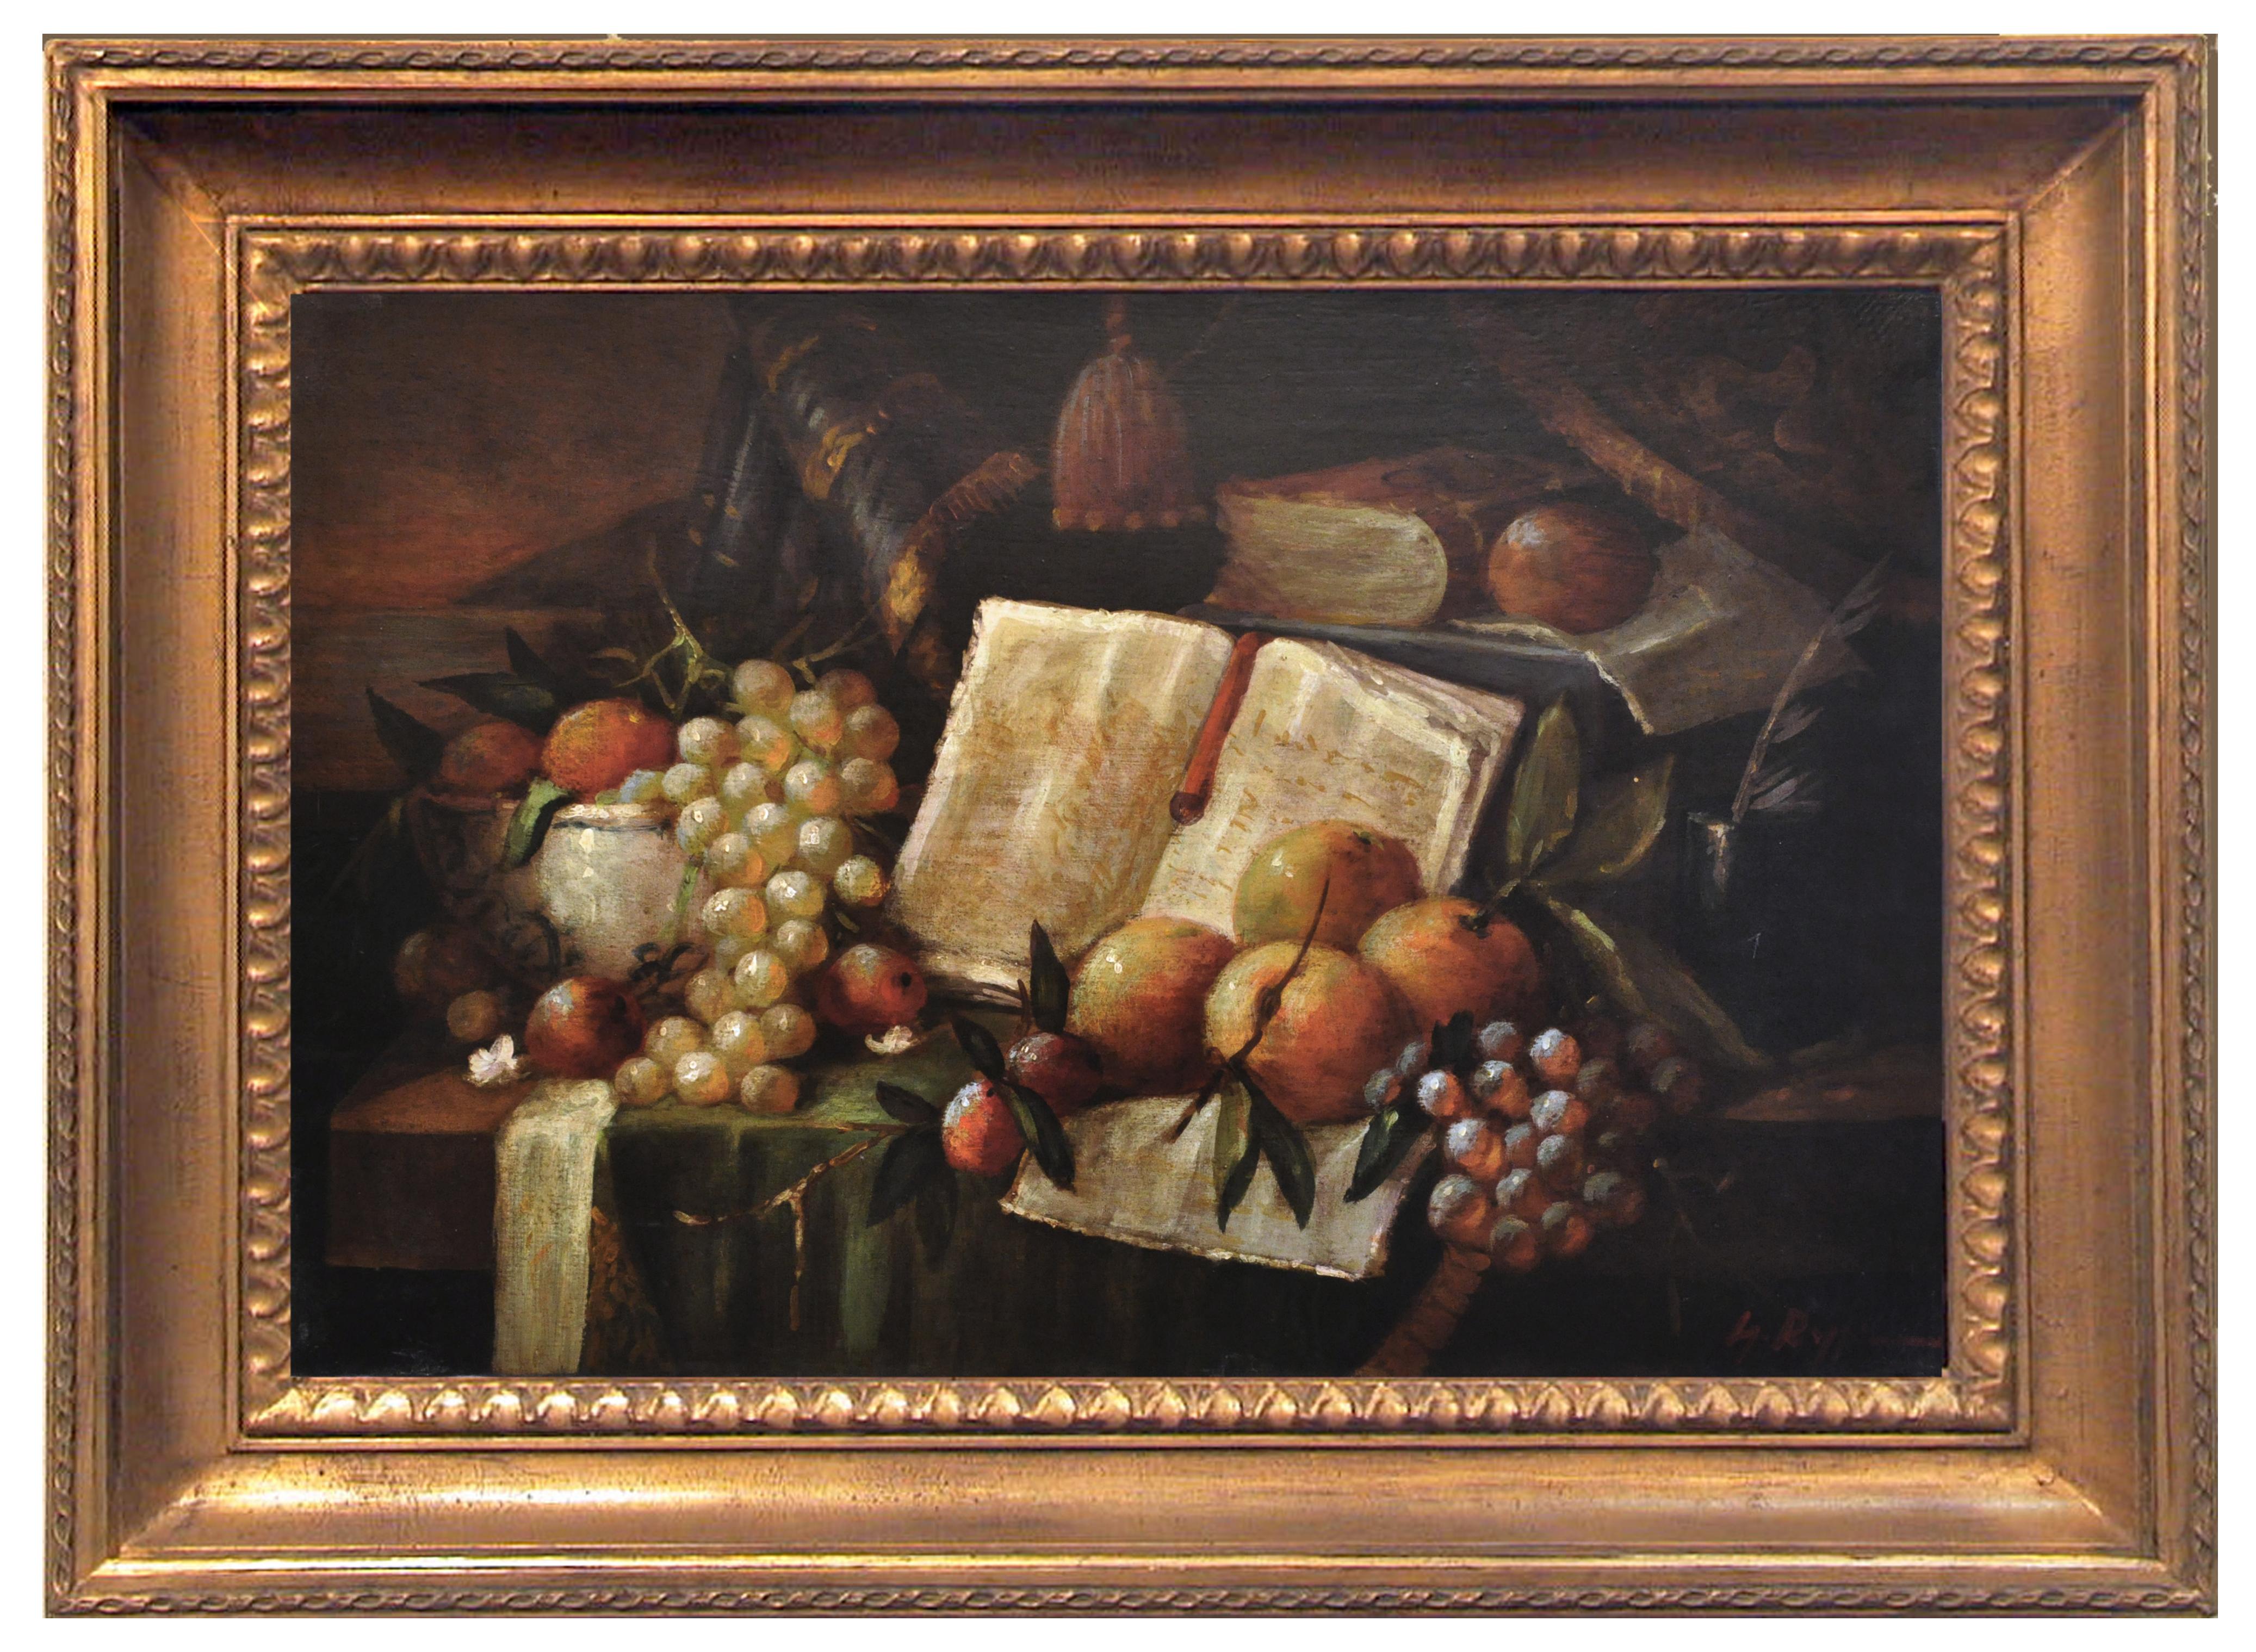 Still life - Massimo Reggiani Italia 2007 - Oil on canvas cm.40x60

Still life, a pictorial representation of foodstuffs, objects or inanimate objects, was one of the artistic genres that became completely independent in the 17th century. The